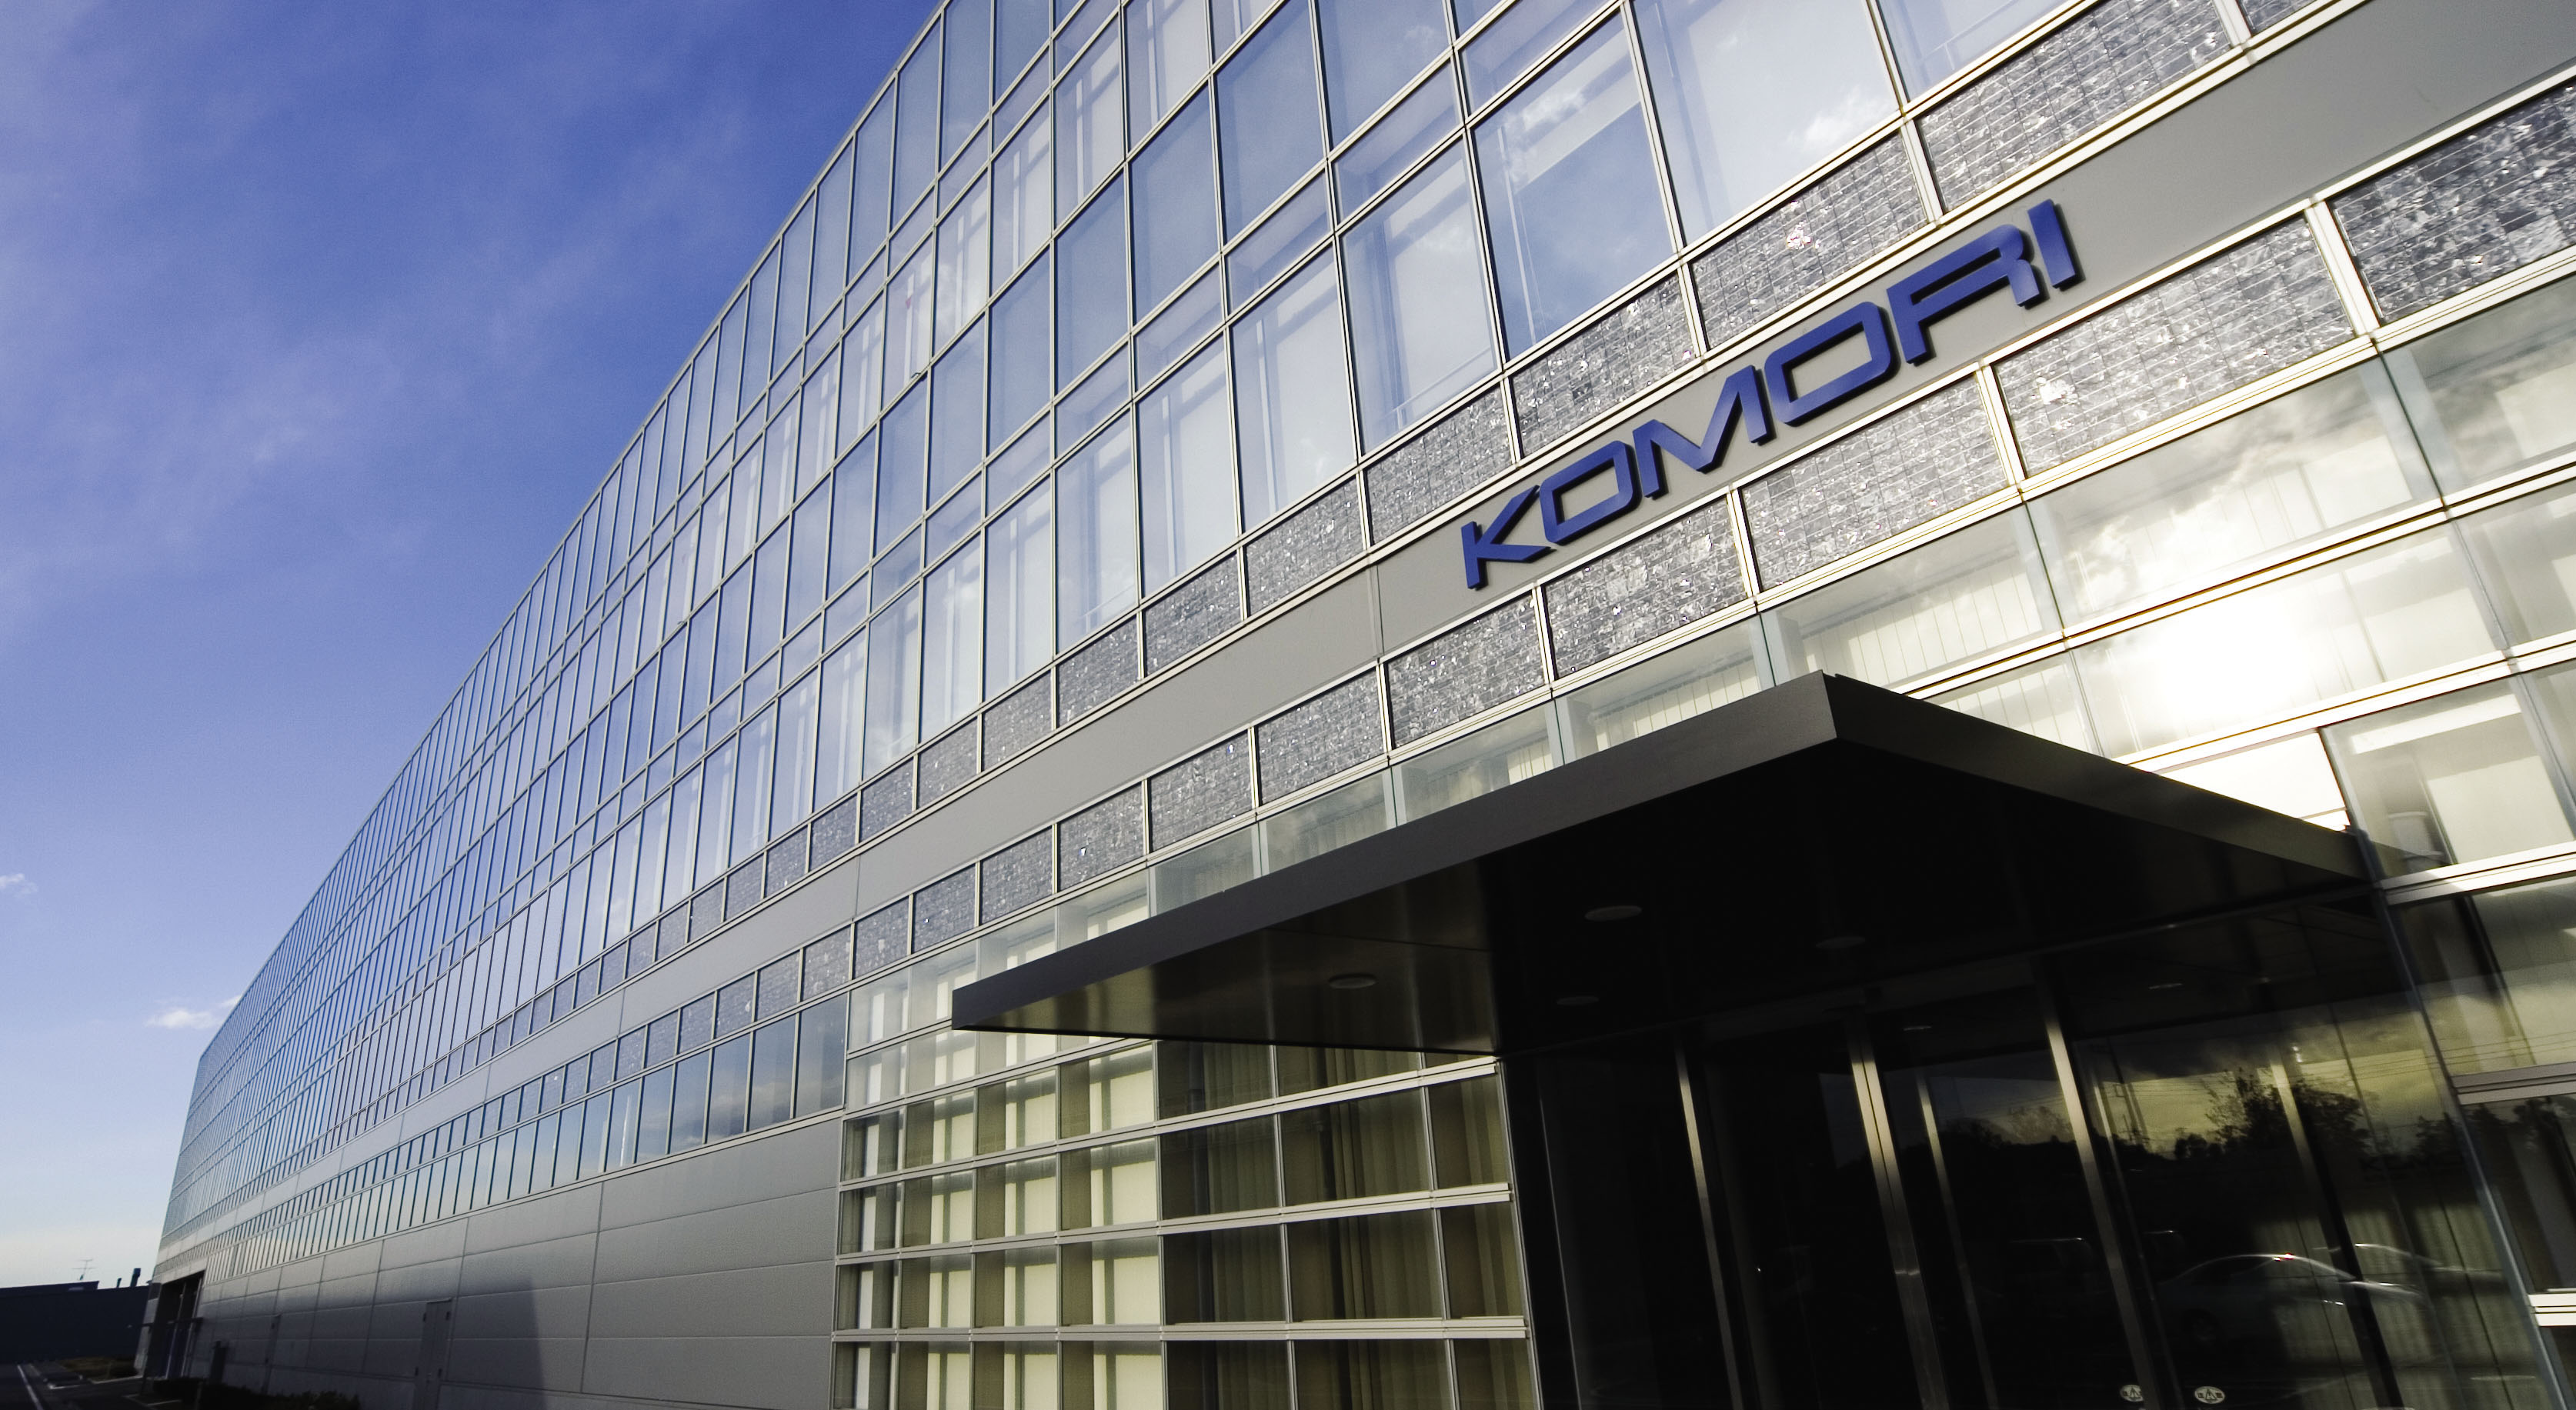 Komori Corporation Announces Its Decision to Acquire an Equity Stake in